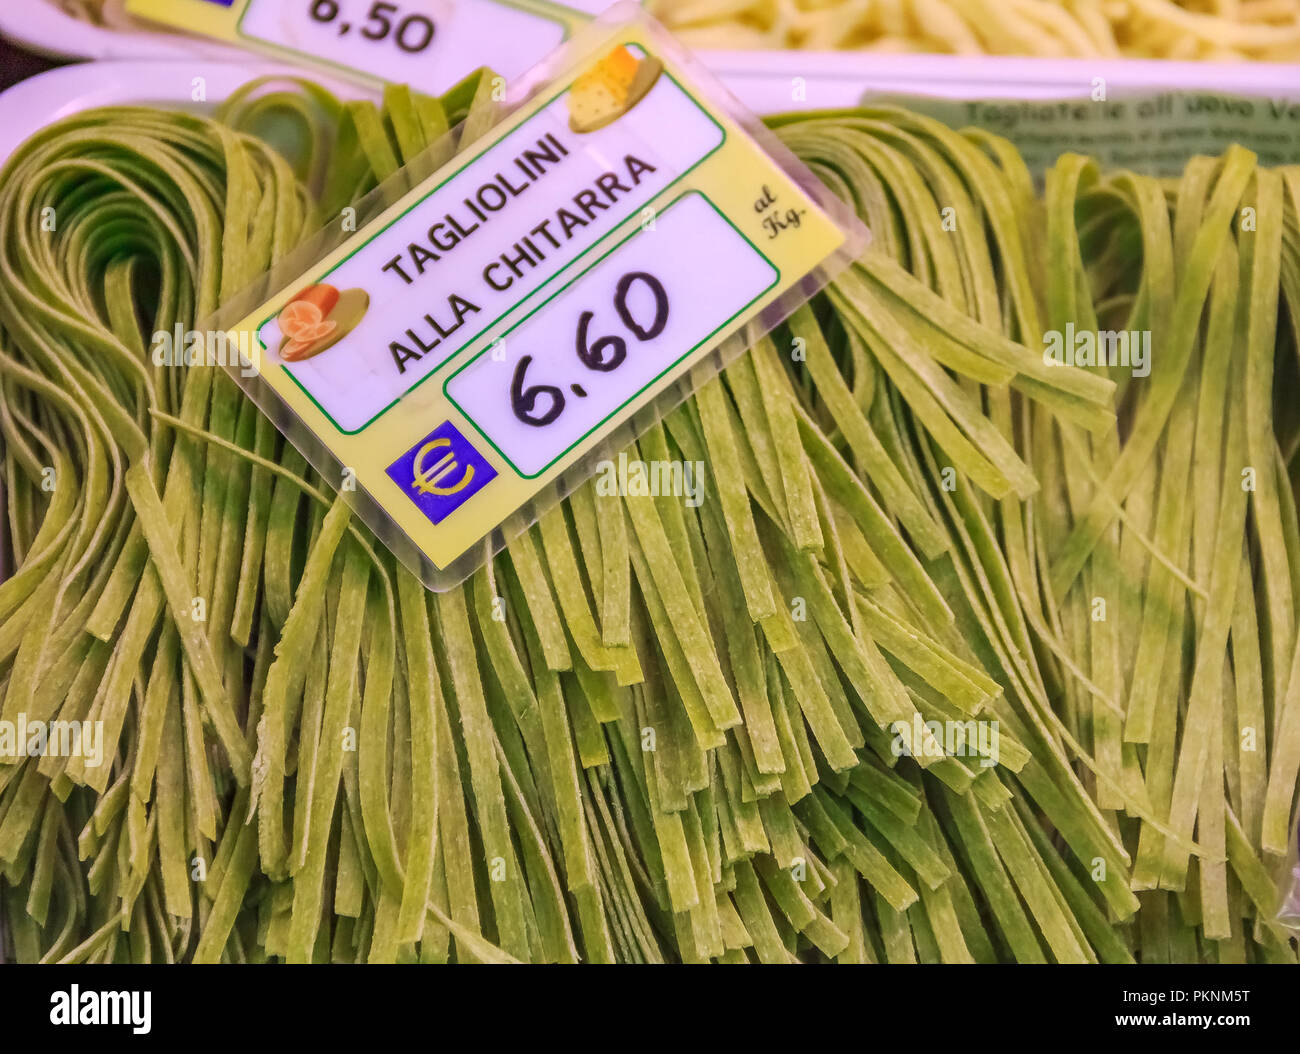 https://c8.alamy.com/comp/PKNM5T/fresh-homemade-tagliolini-made-with-a-chitarra-pasta-cutter-at-a-market-in-ventimiglia-italy-with-a-price-tag-PKNM5T.jpg